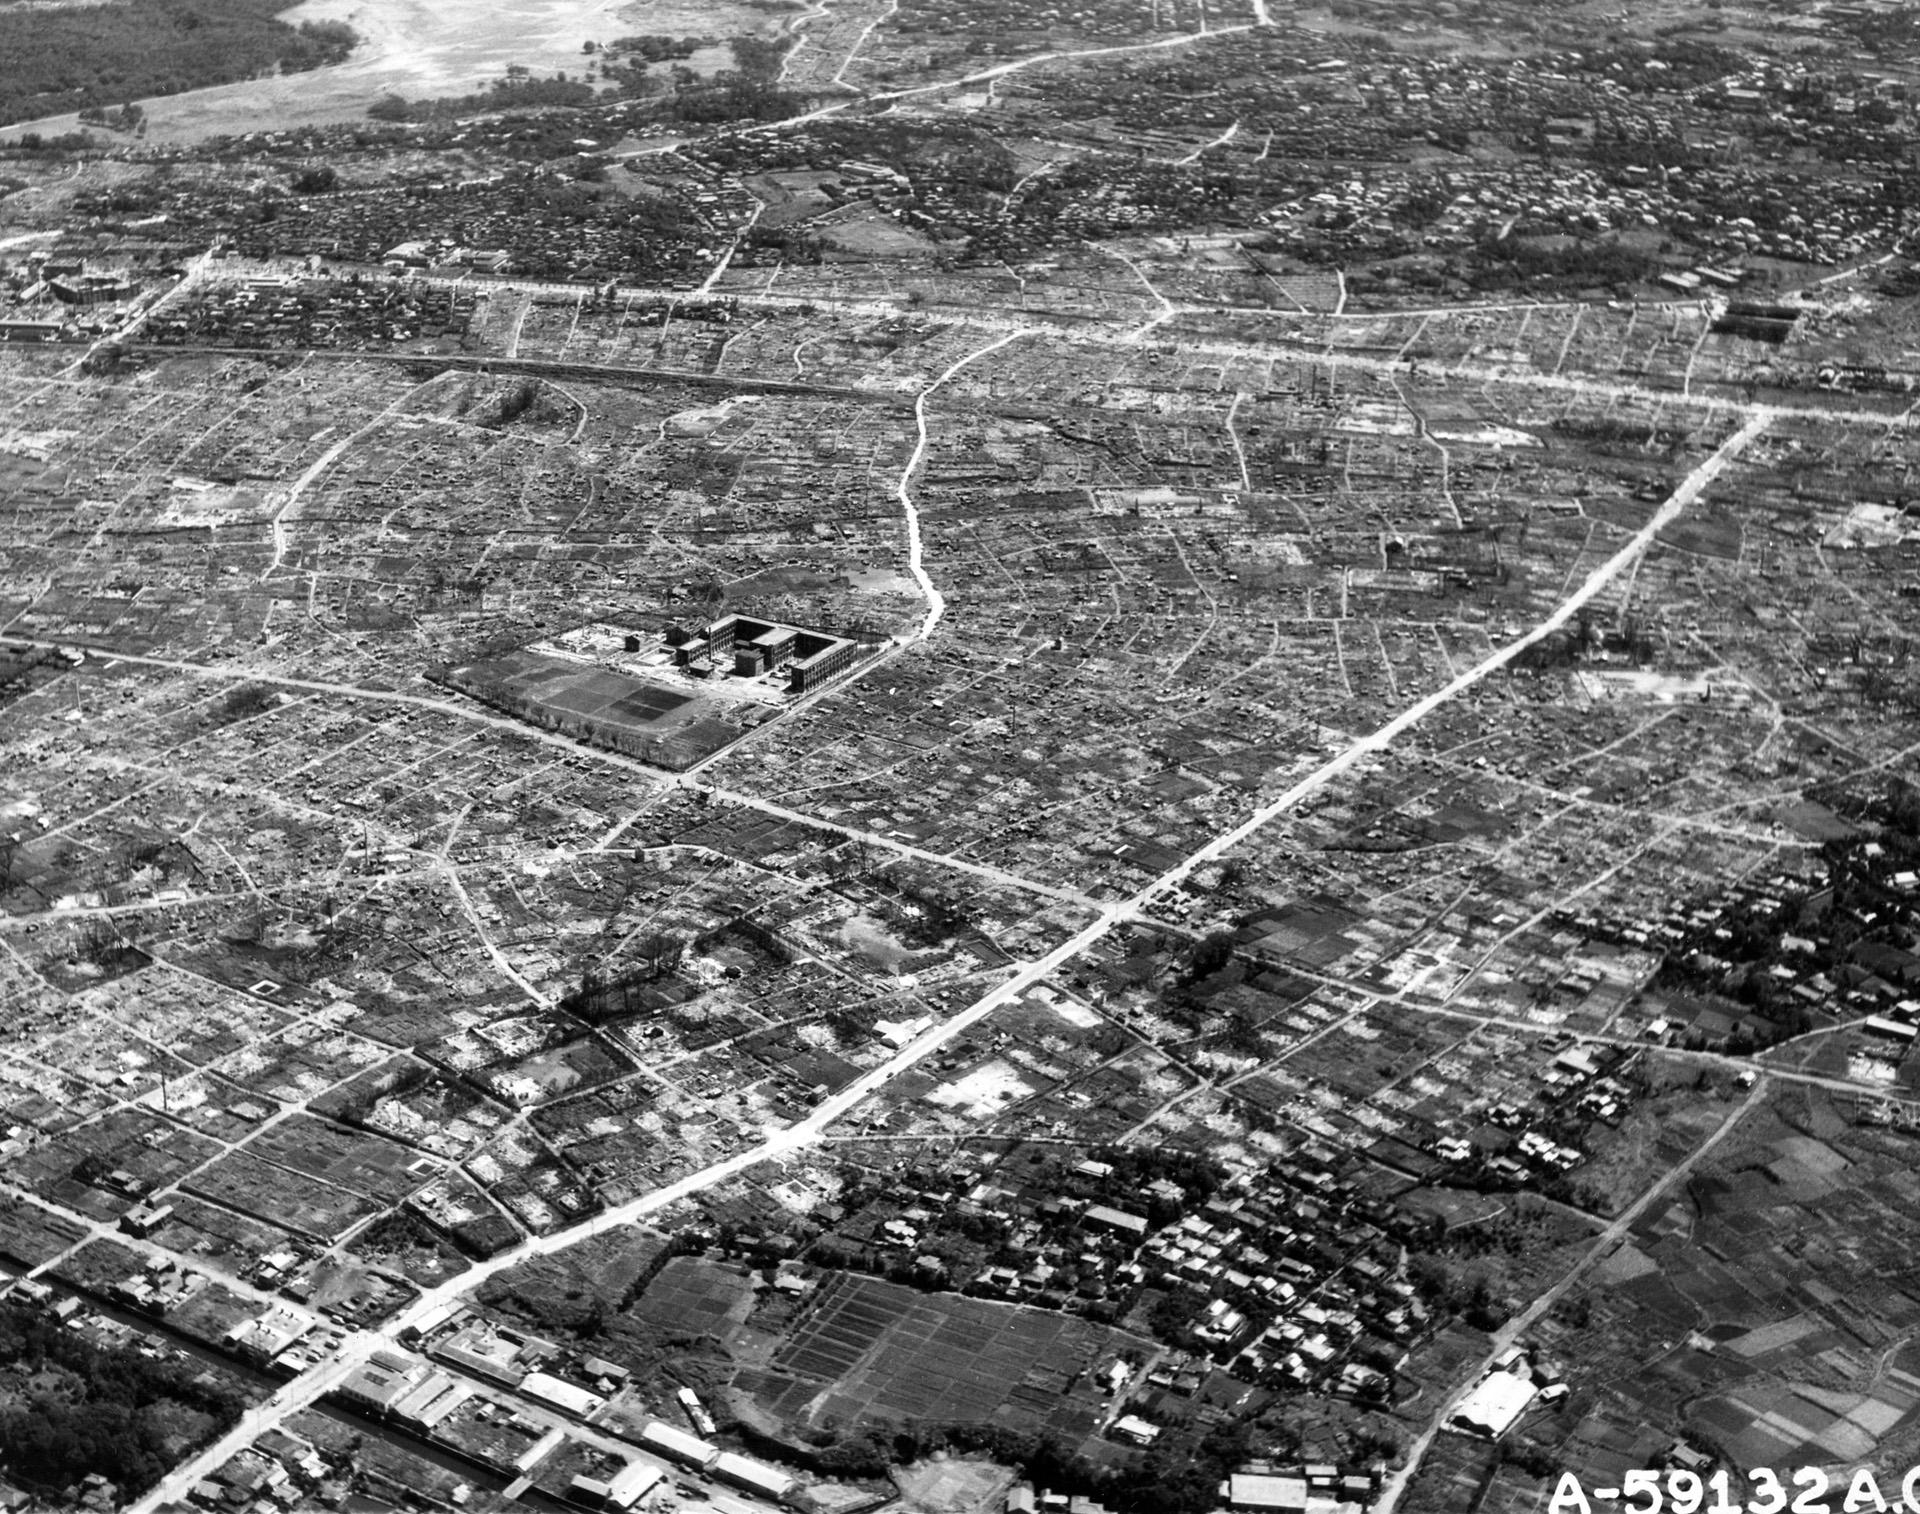 Looking more like Hiroshima after the atomic bombing, Tokyo, the world's third largest city, was reduced to rubble by war’s end.